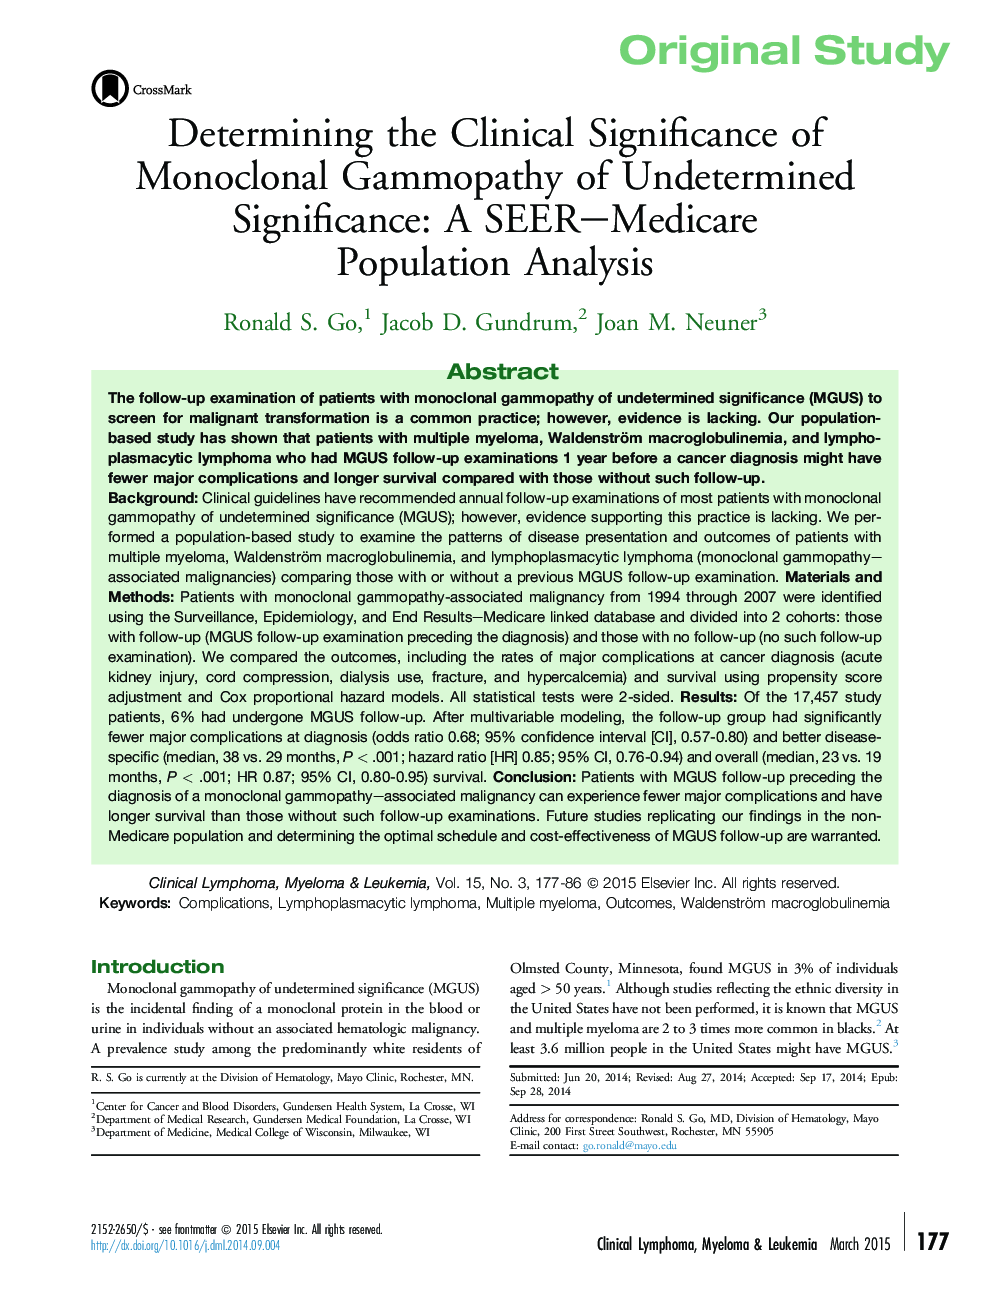 Determining the Clinical Significance of Monoclonal Gammopathy of Undetermined Significance: A SEER-Medicare Population Analysis